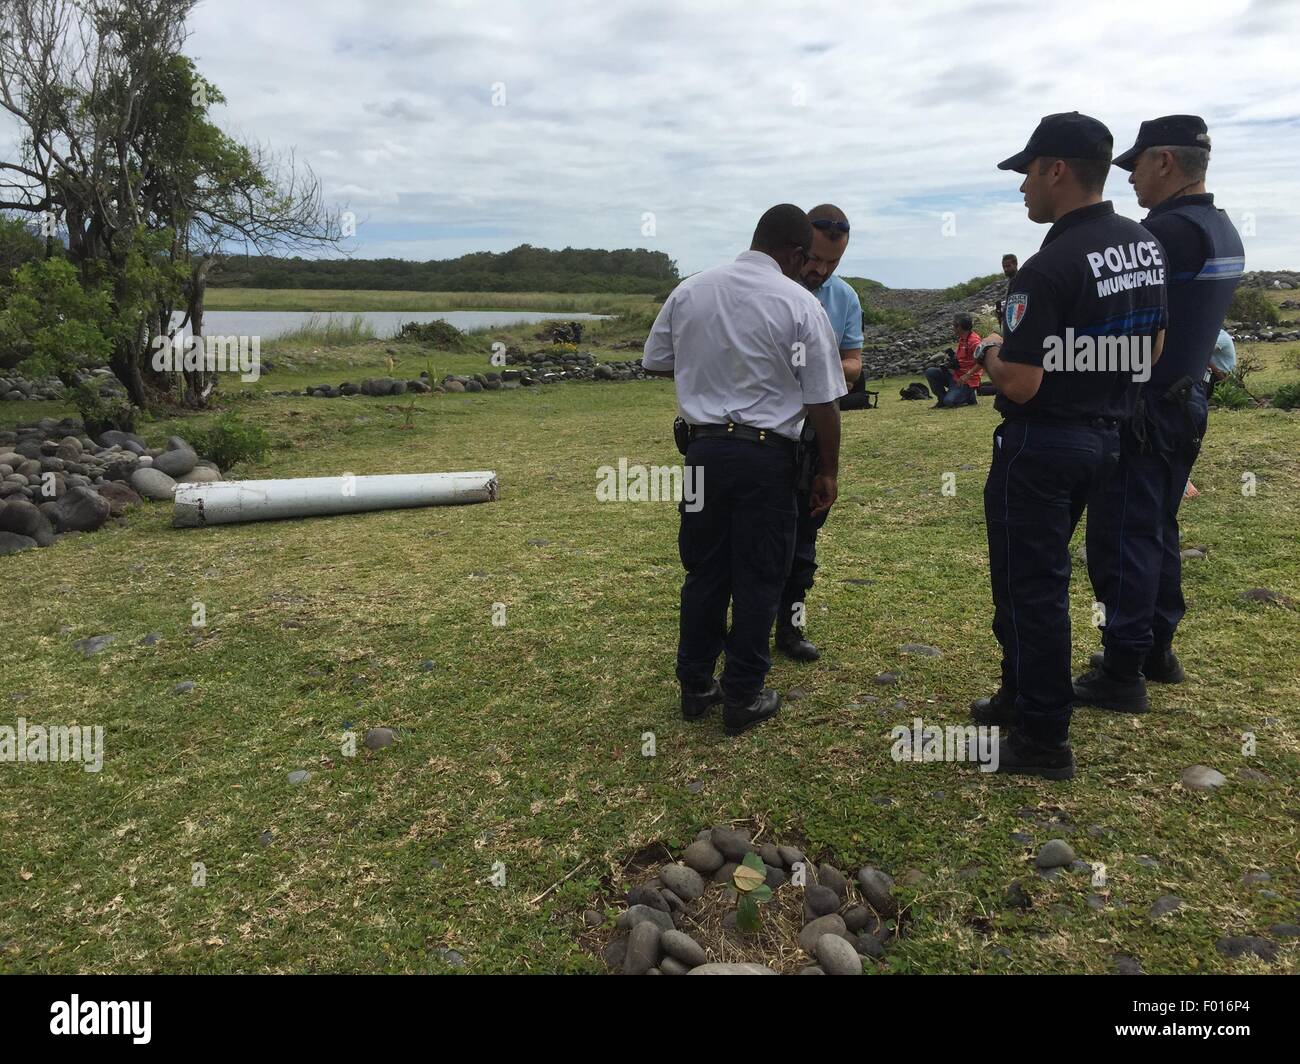 The Reunion Island. 29th July, 2015. Police officers guard the debris on Reunion Island, on Jul.29, 2015. Verification had confirmed that the debris discovered on Reunion Island belongs to missing Malaysian Airlines flight MH370, Malaysian Prime Minister Najib Razak announced early Thursday. © Romain Latournerie/Xinhua/Alamy Live News Stock Photo